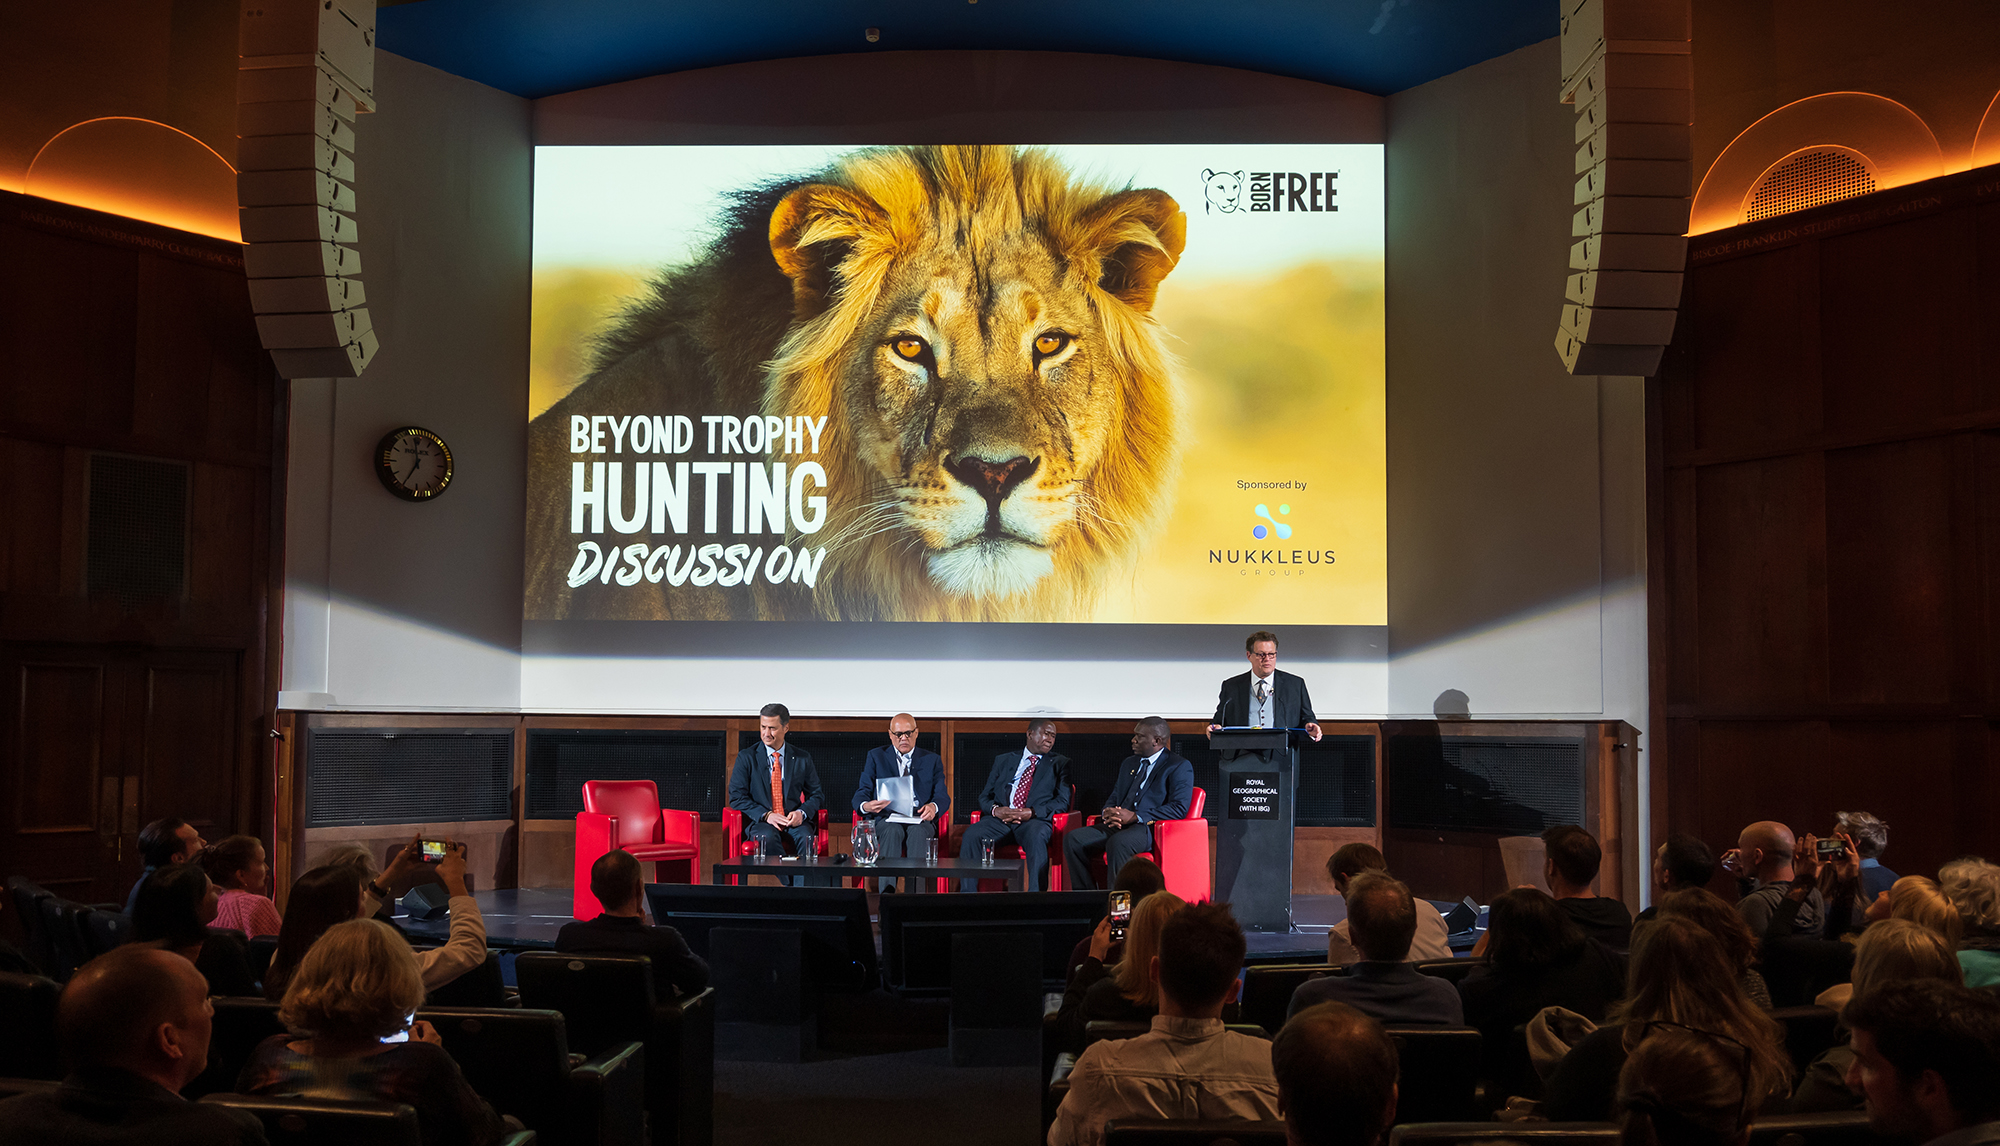 Will Travers standing at a lectern with four panellists at the RGS in London, with 'Beyond Trophy Hunting' and a photo of a lion on the screen behind him